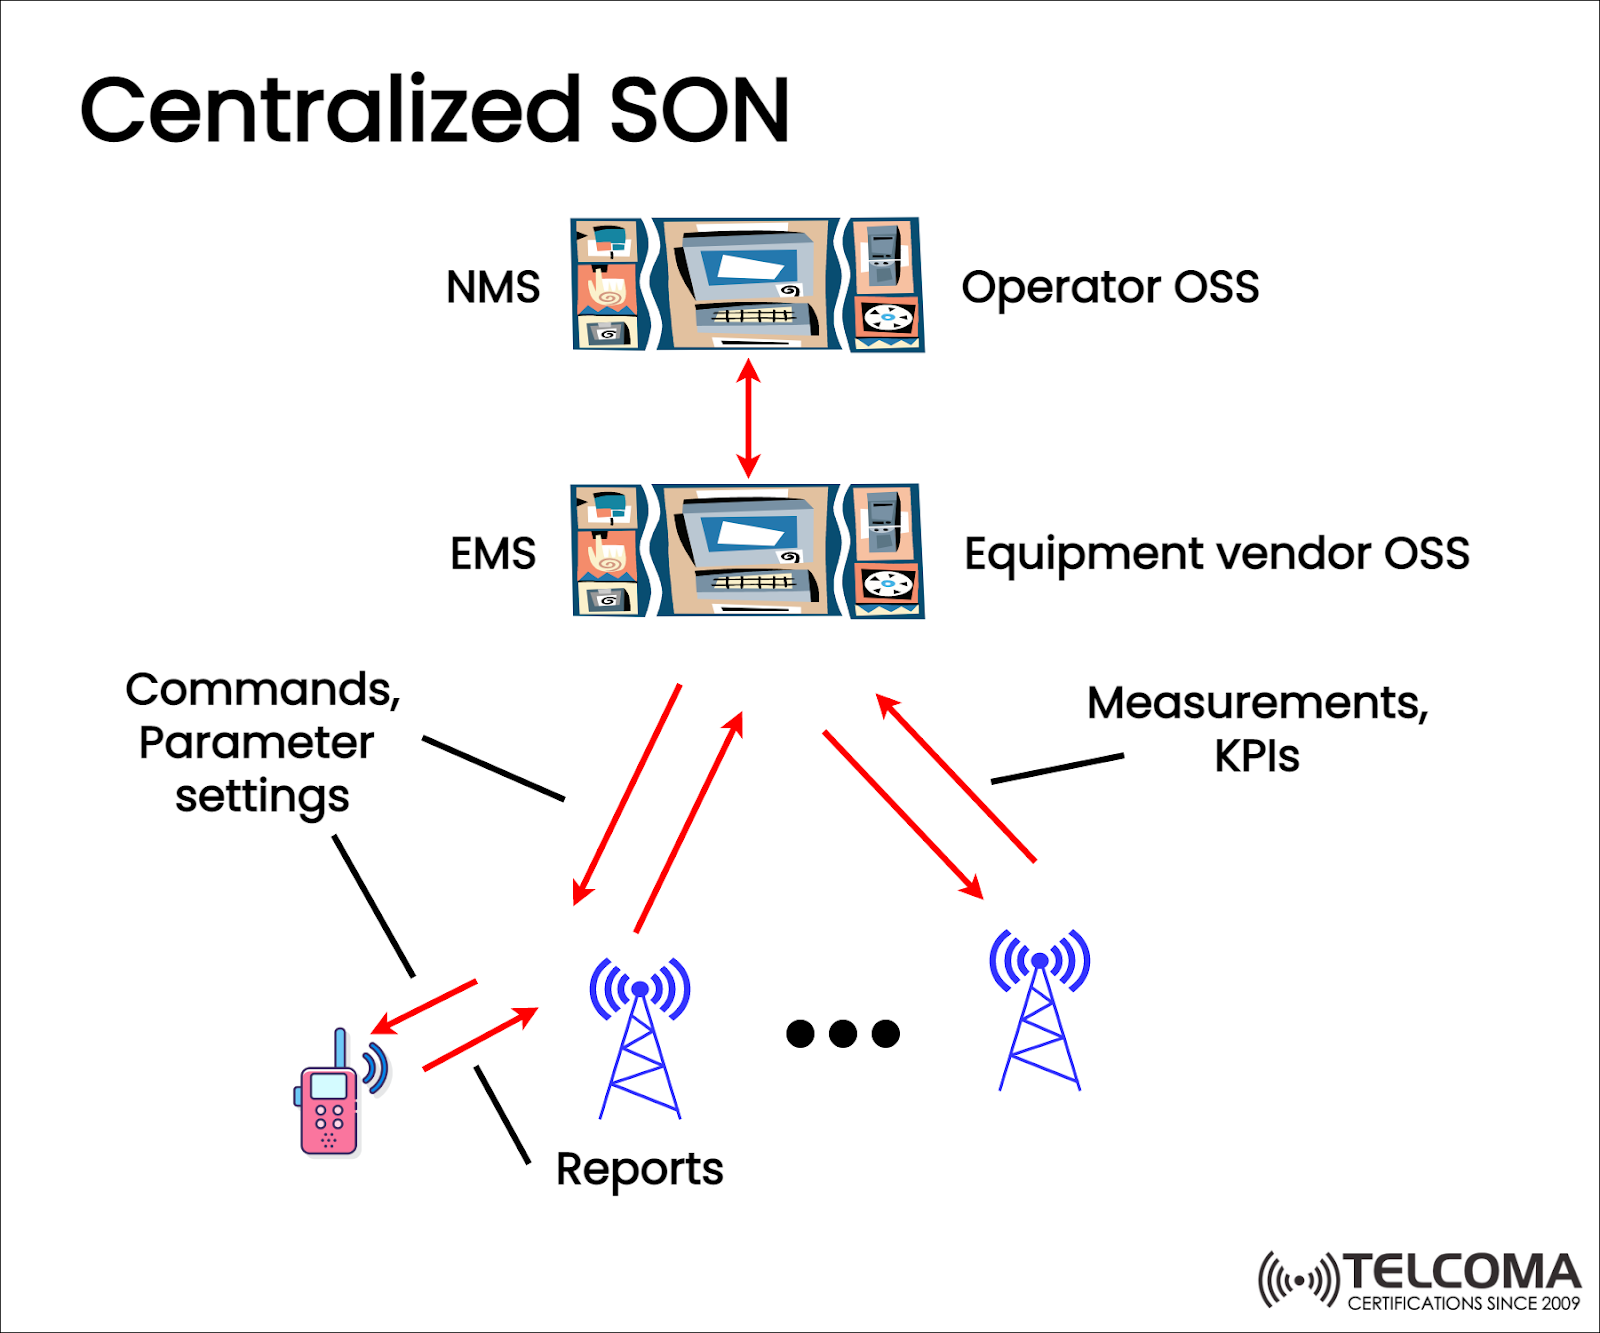 Centralized SON